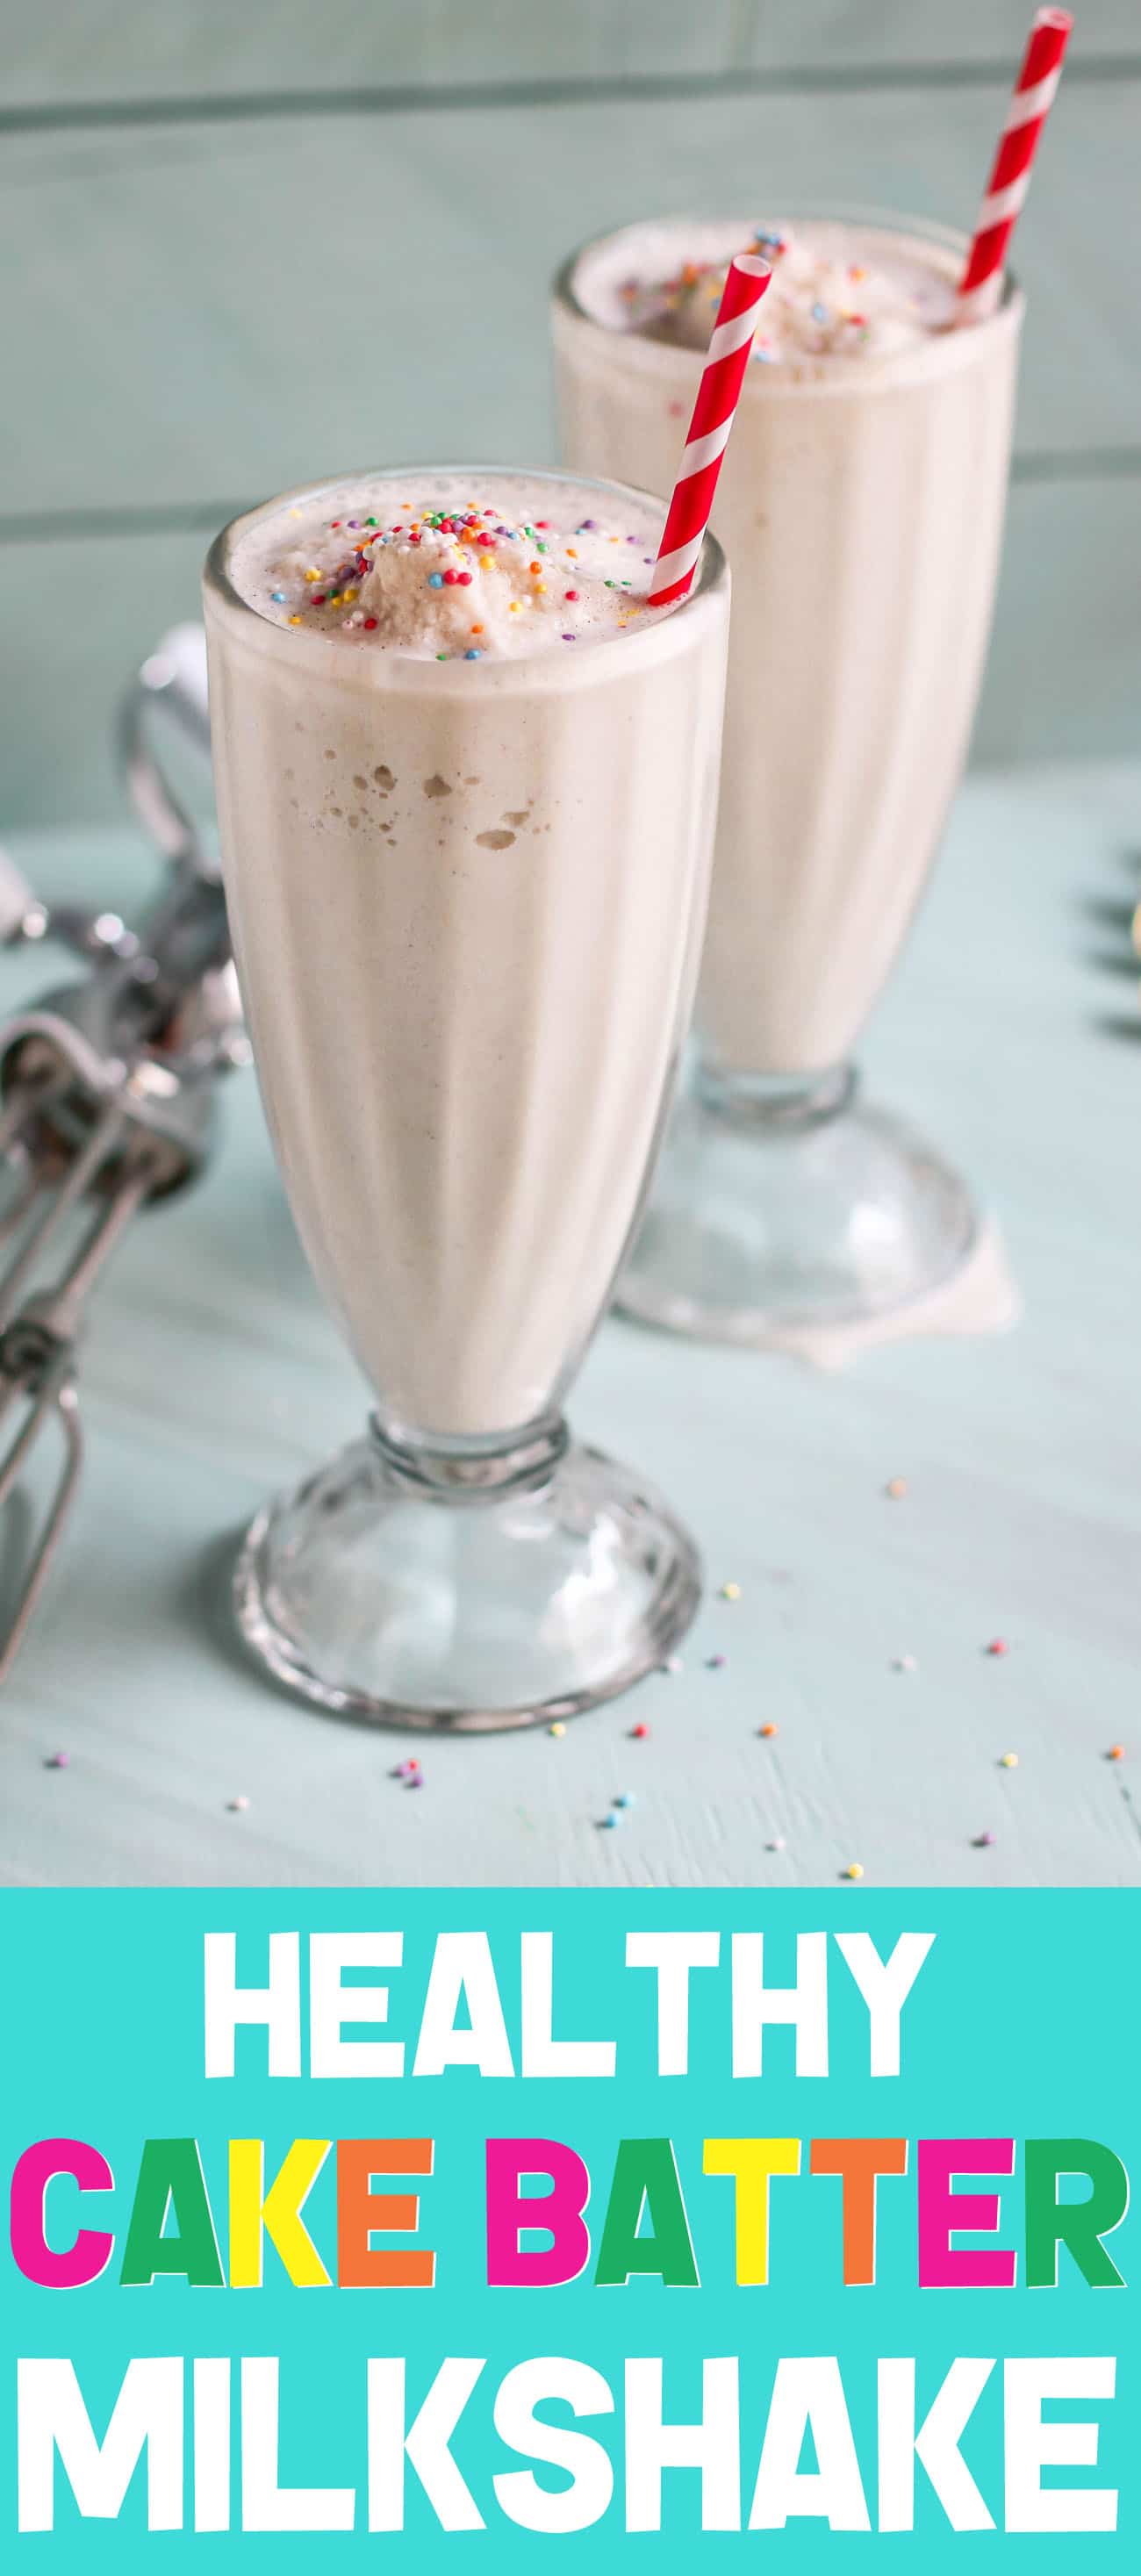 When you're craving cake but don't want to go through the hassle of baking, make this Cake Batter Milkshake! It's secretly sugar free, low fat, high protein, and gluten free too, made with kefir (or yogurt), oats, vanilla, and a couple secret ingredients that make it taste just like vanilla cake in drinkable form.